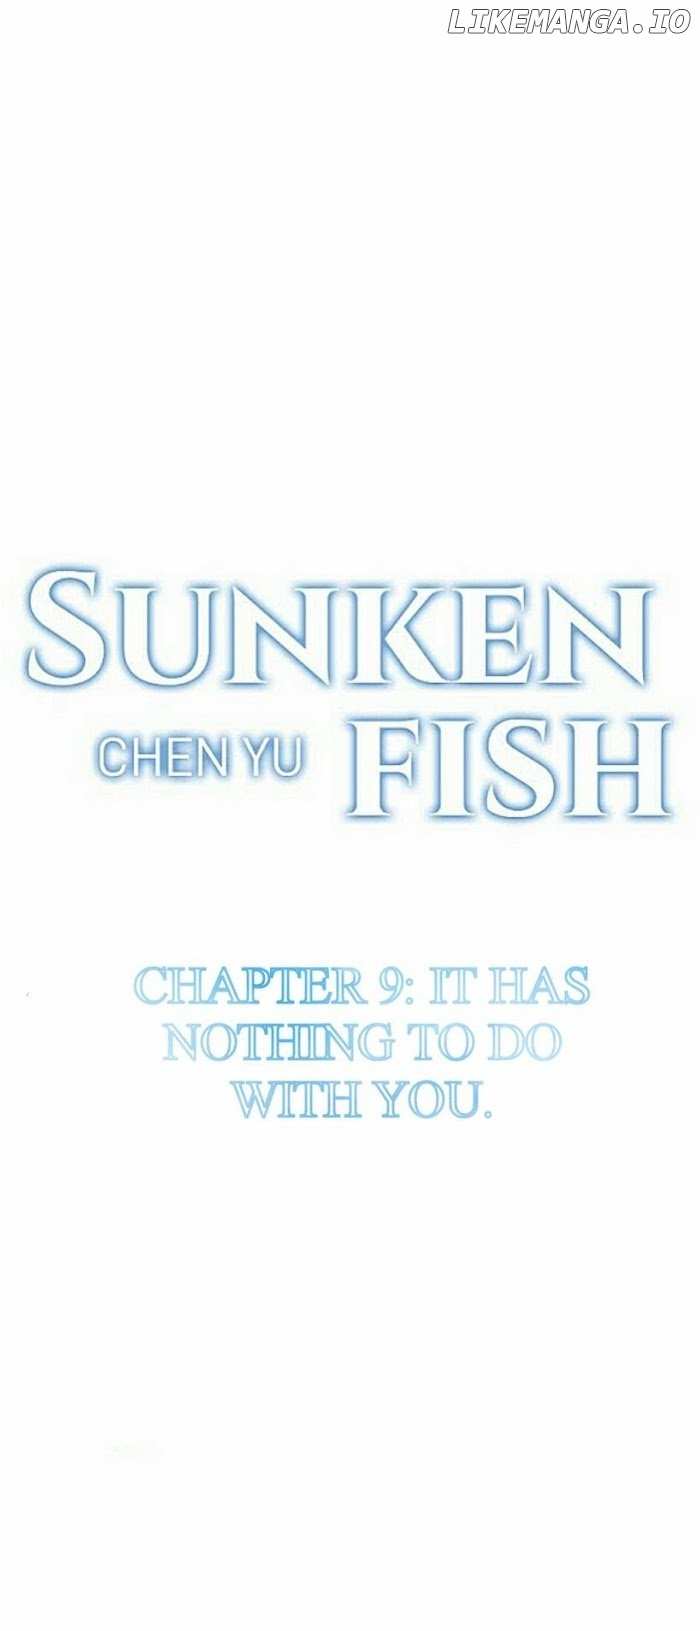 Sunken Fish Chapter 9 - page 5